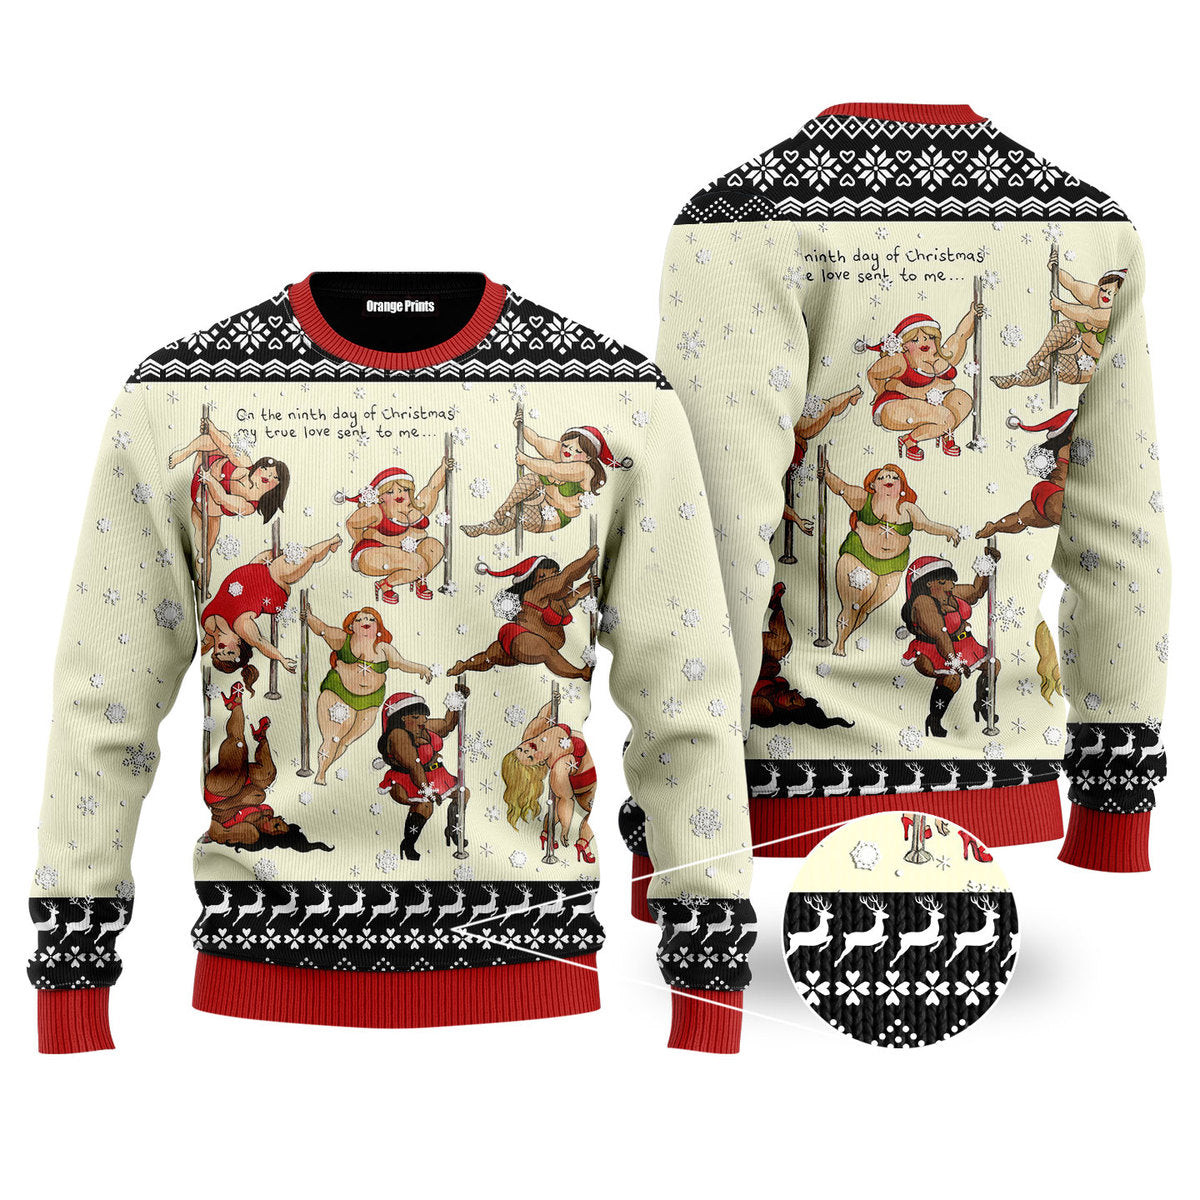 Nine Ladies Dancing Sexy Christmas Ugly Christmas Sweater Ugly Sweater For Men Women